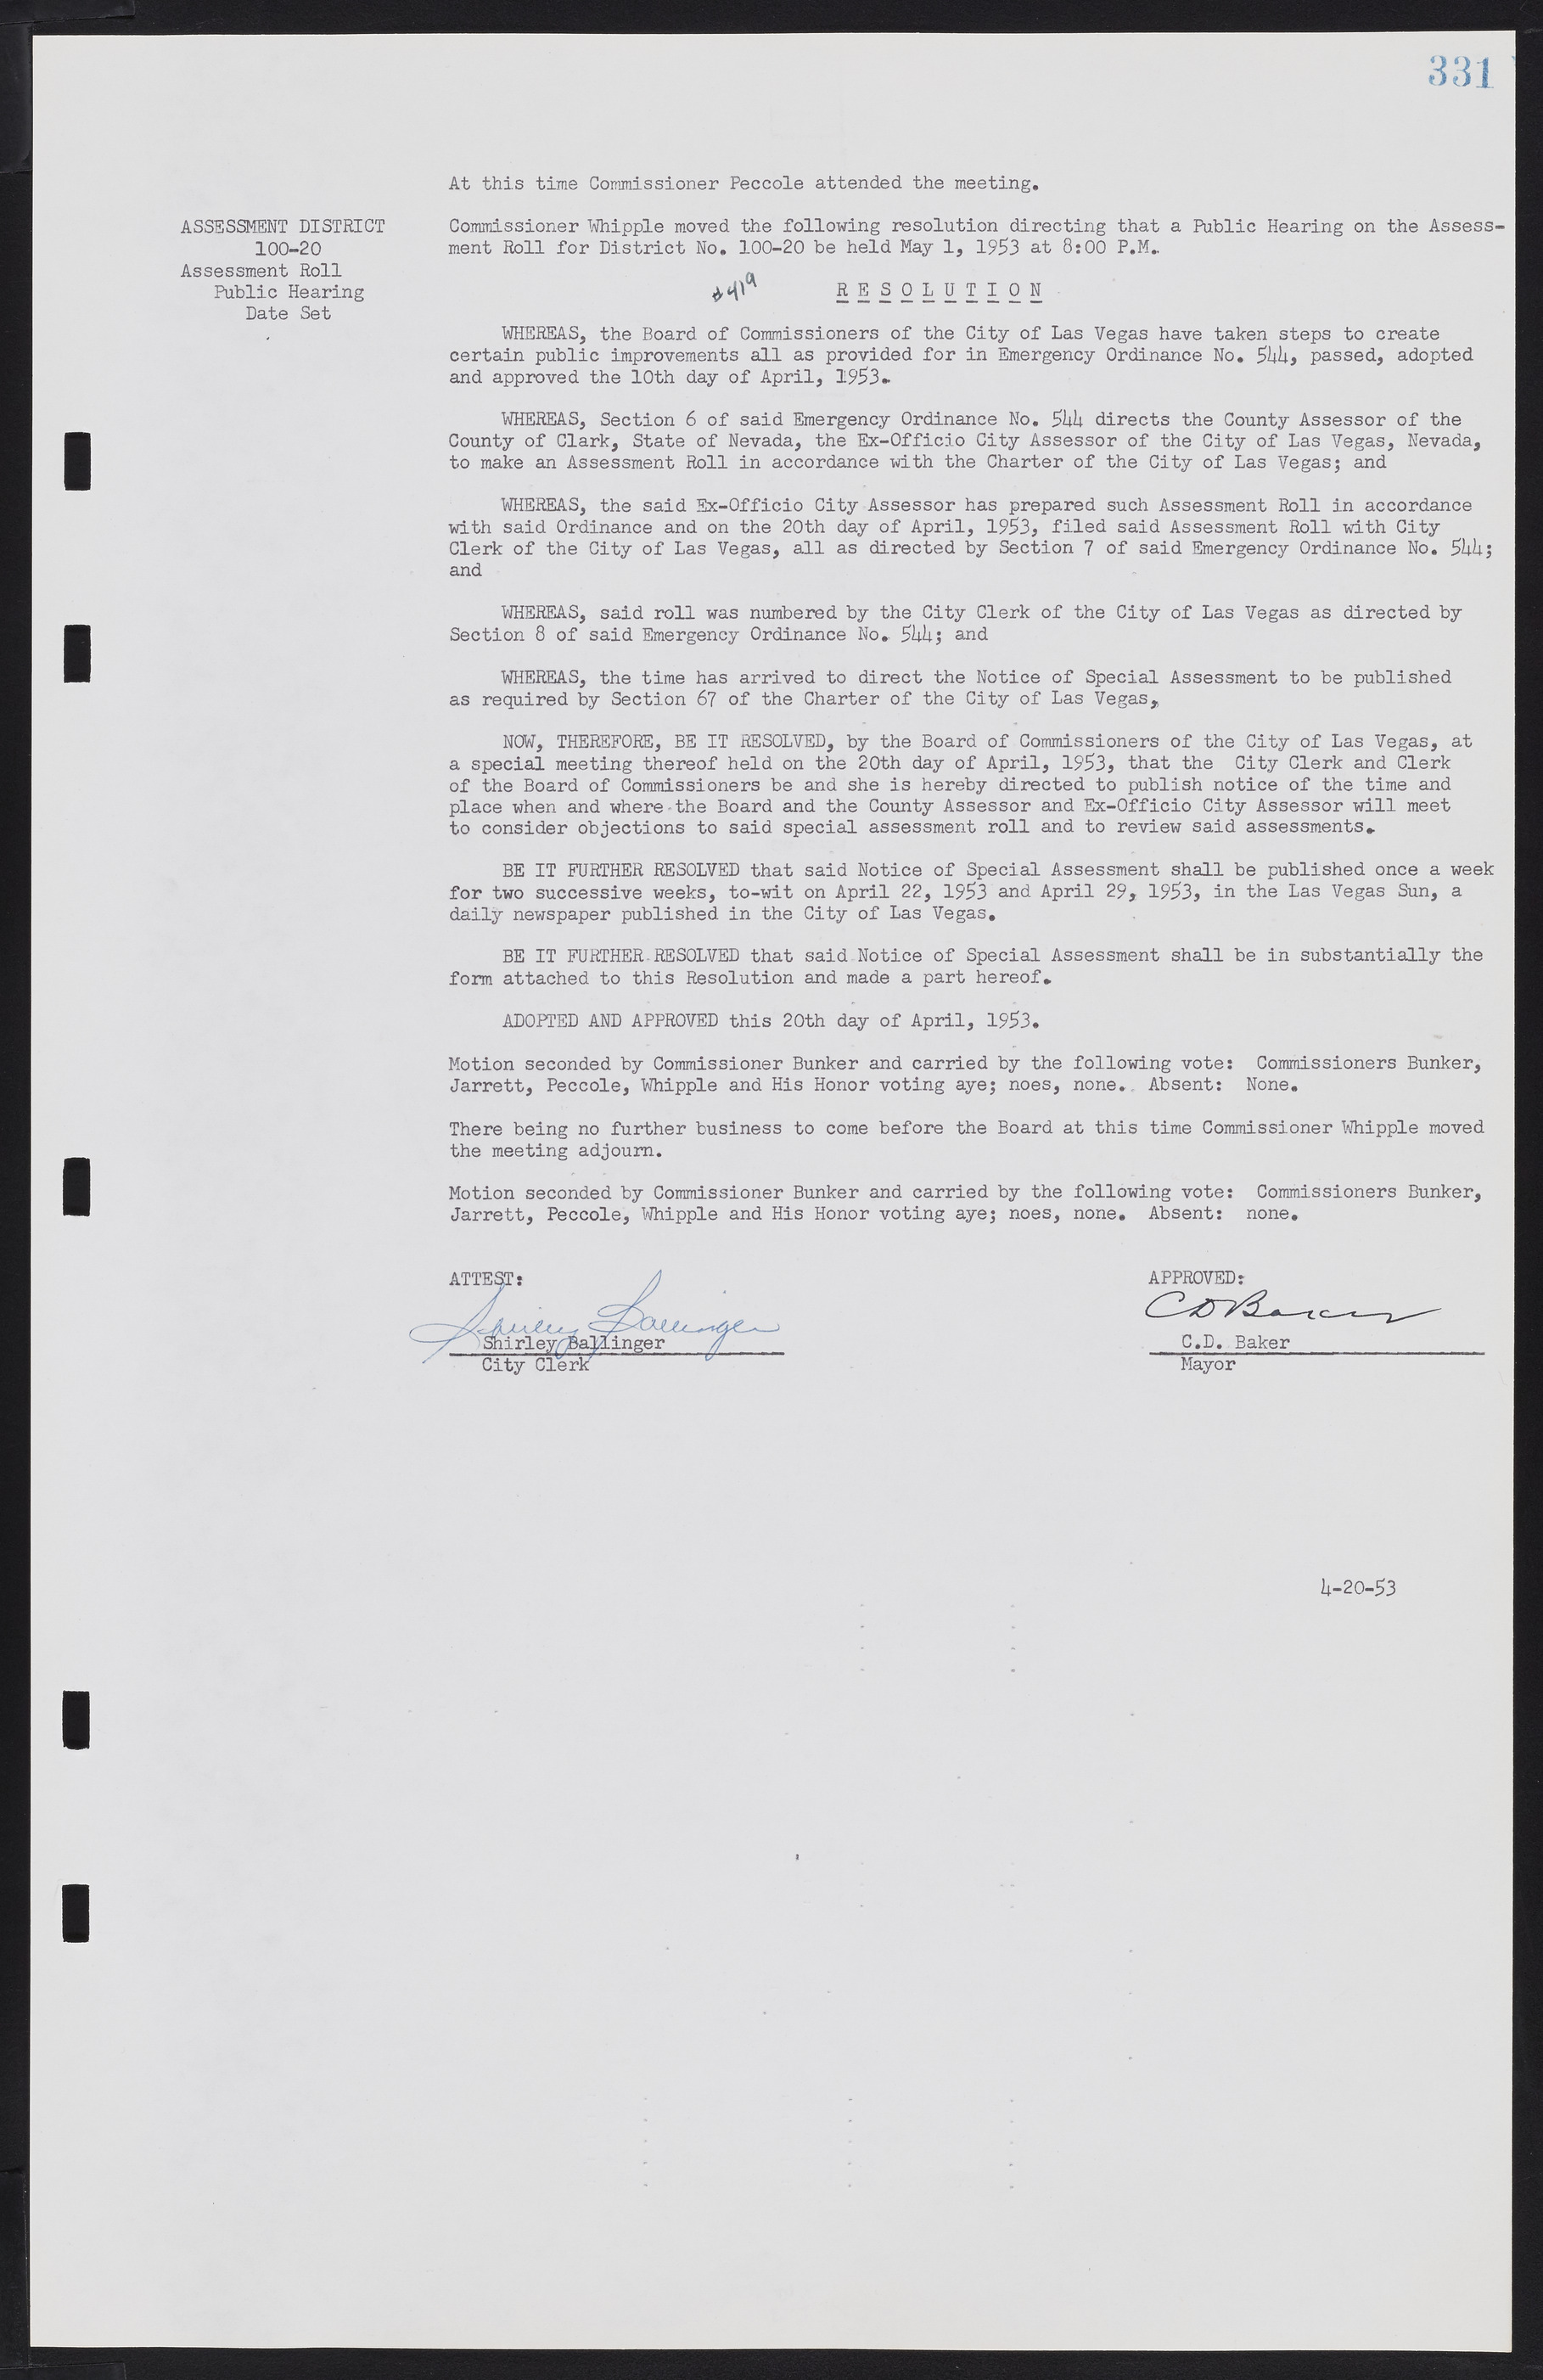 Las Vegas City Commission Minutes, May 26, 1952 to February 17, 1954, lvc000008-359